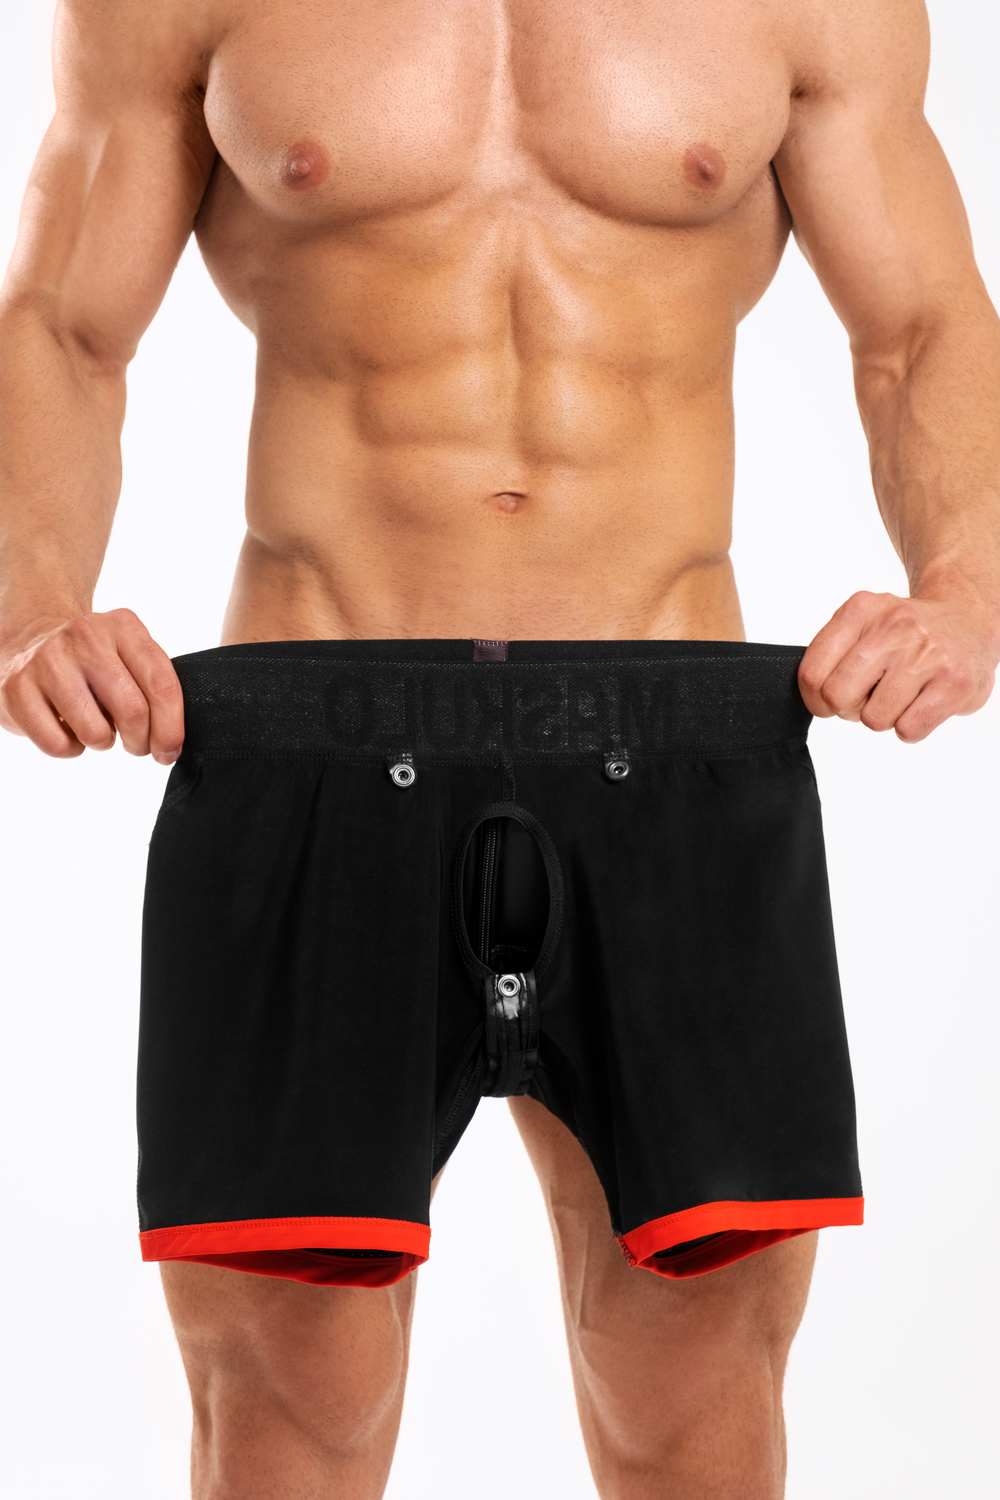 Basic Shorts with Pads. Zippered rear. Black+Red